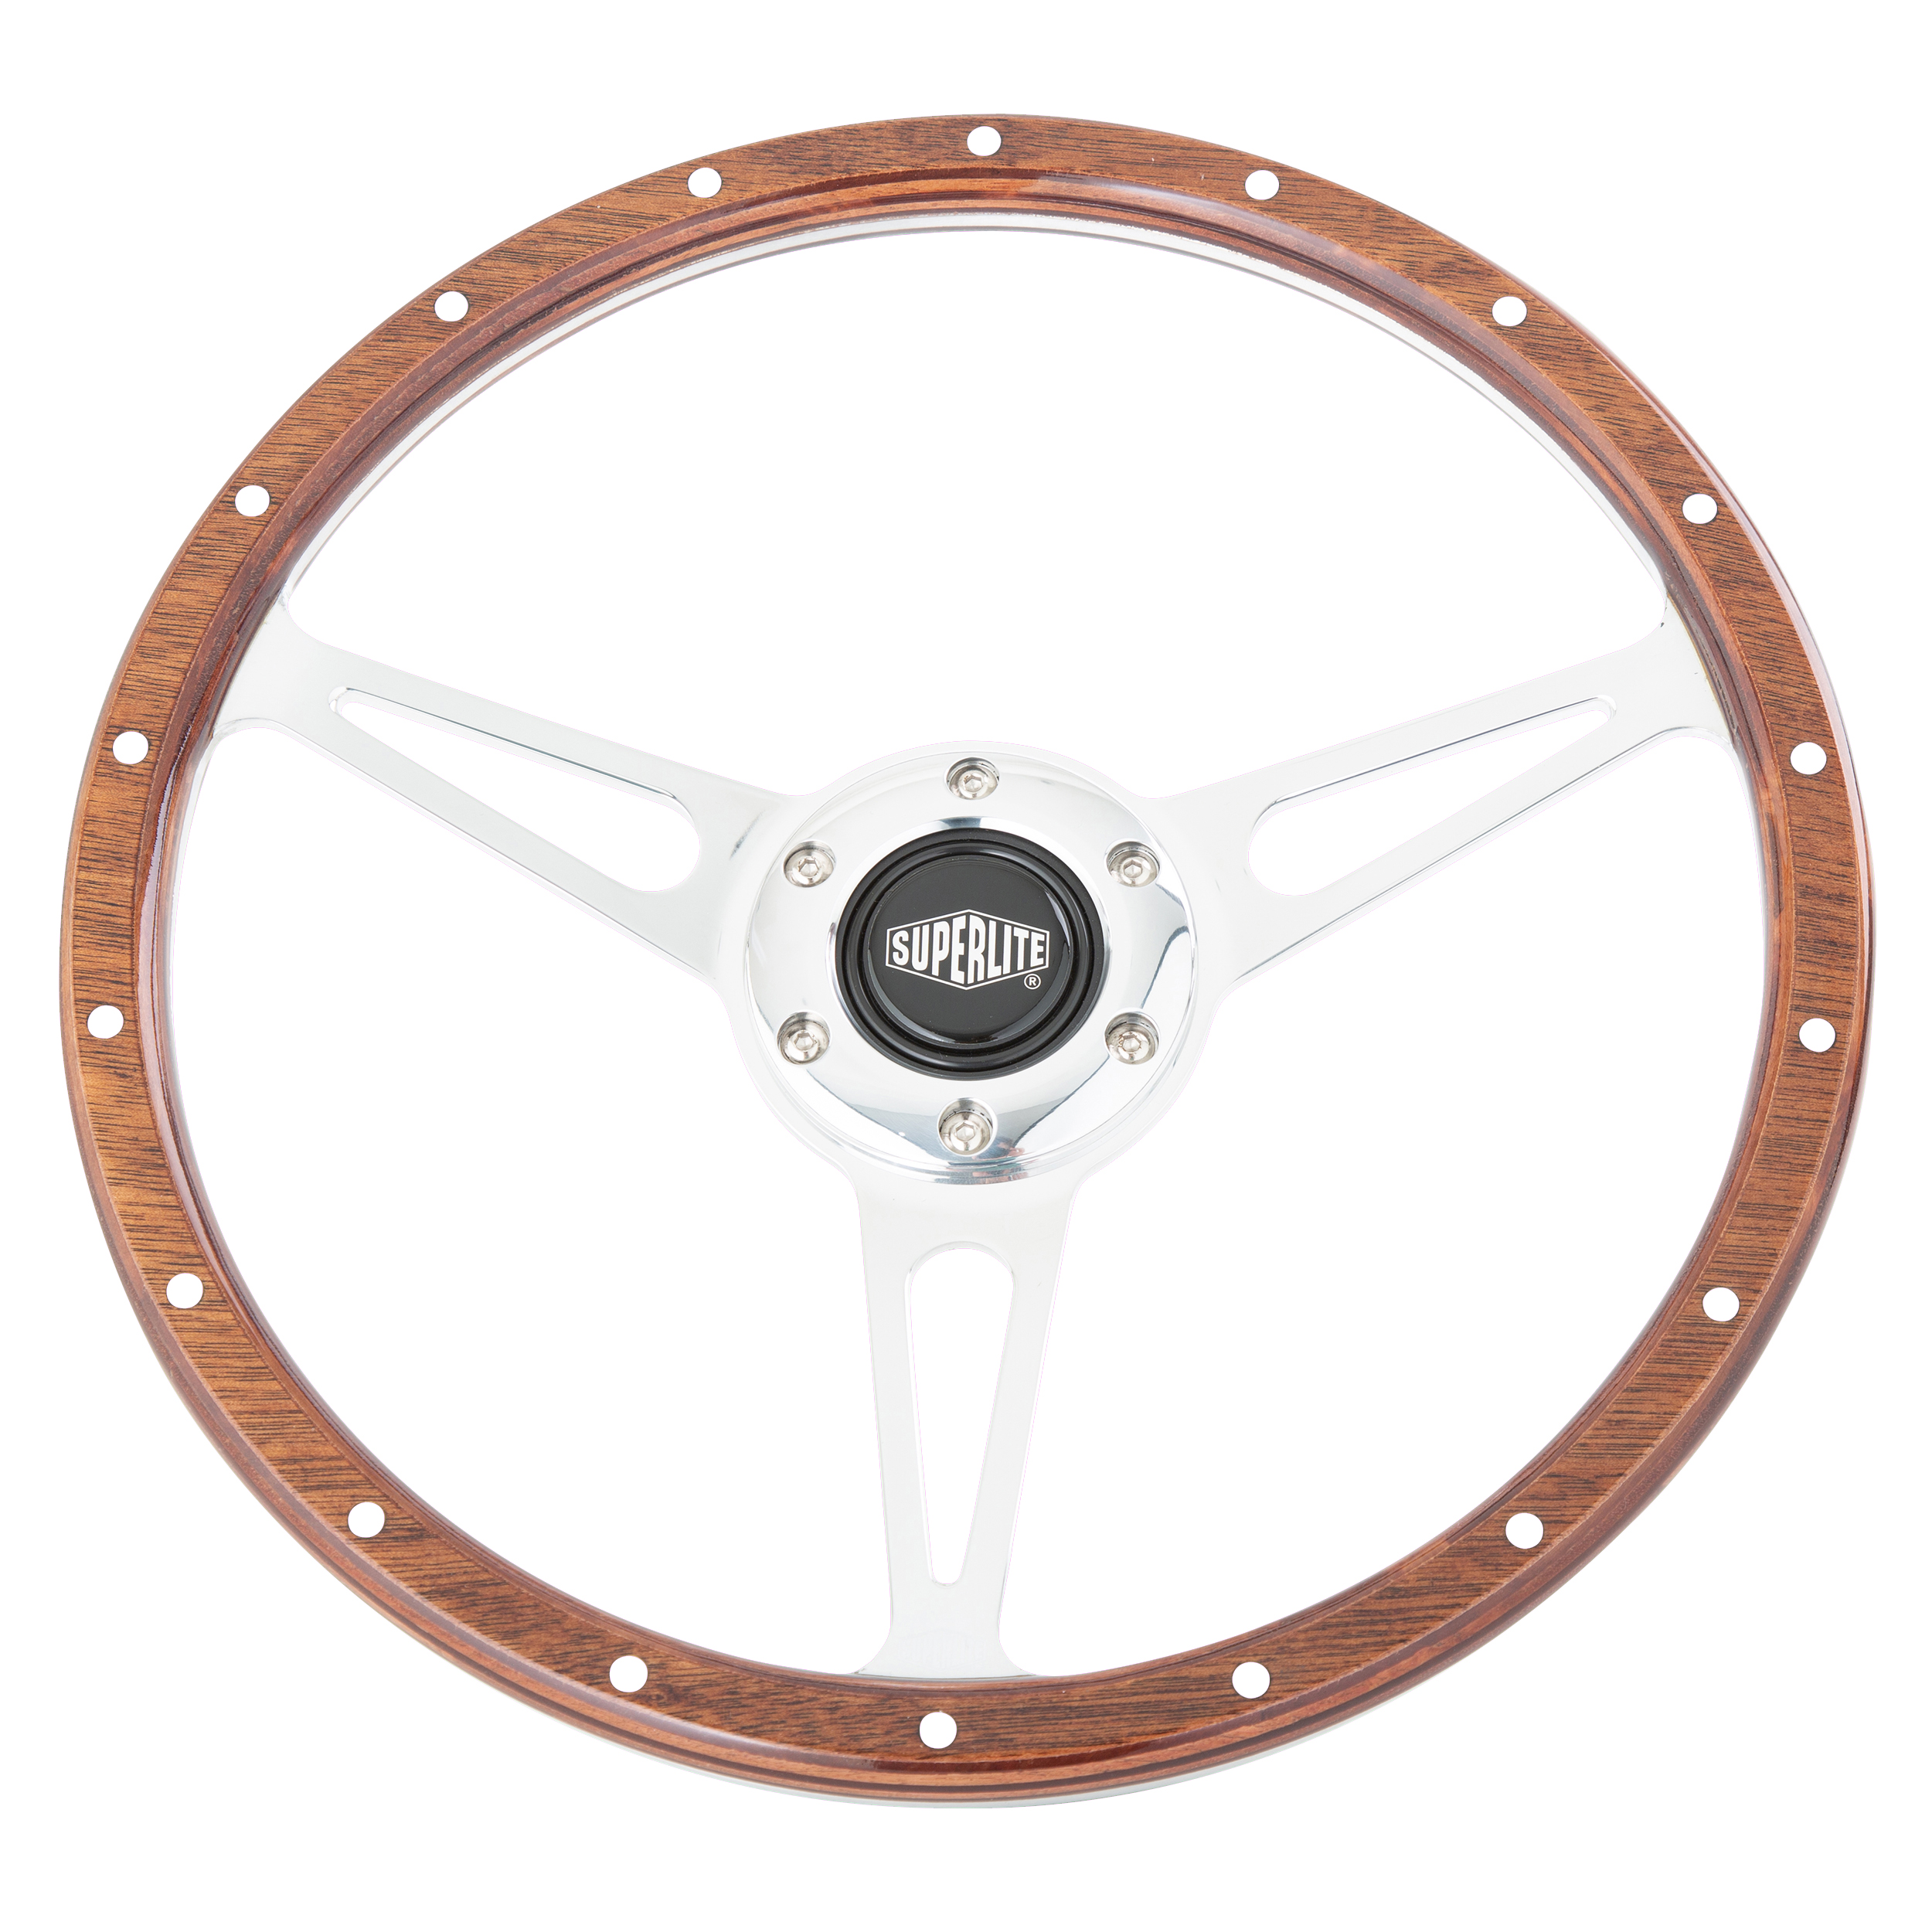 13" SUPERLITE® Dark Woodrim Steering Wheel With Slotted Spokes including boss kit to Fit Classic Mini